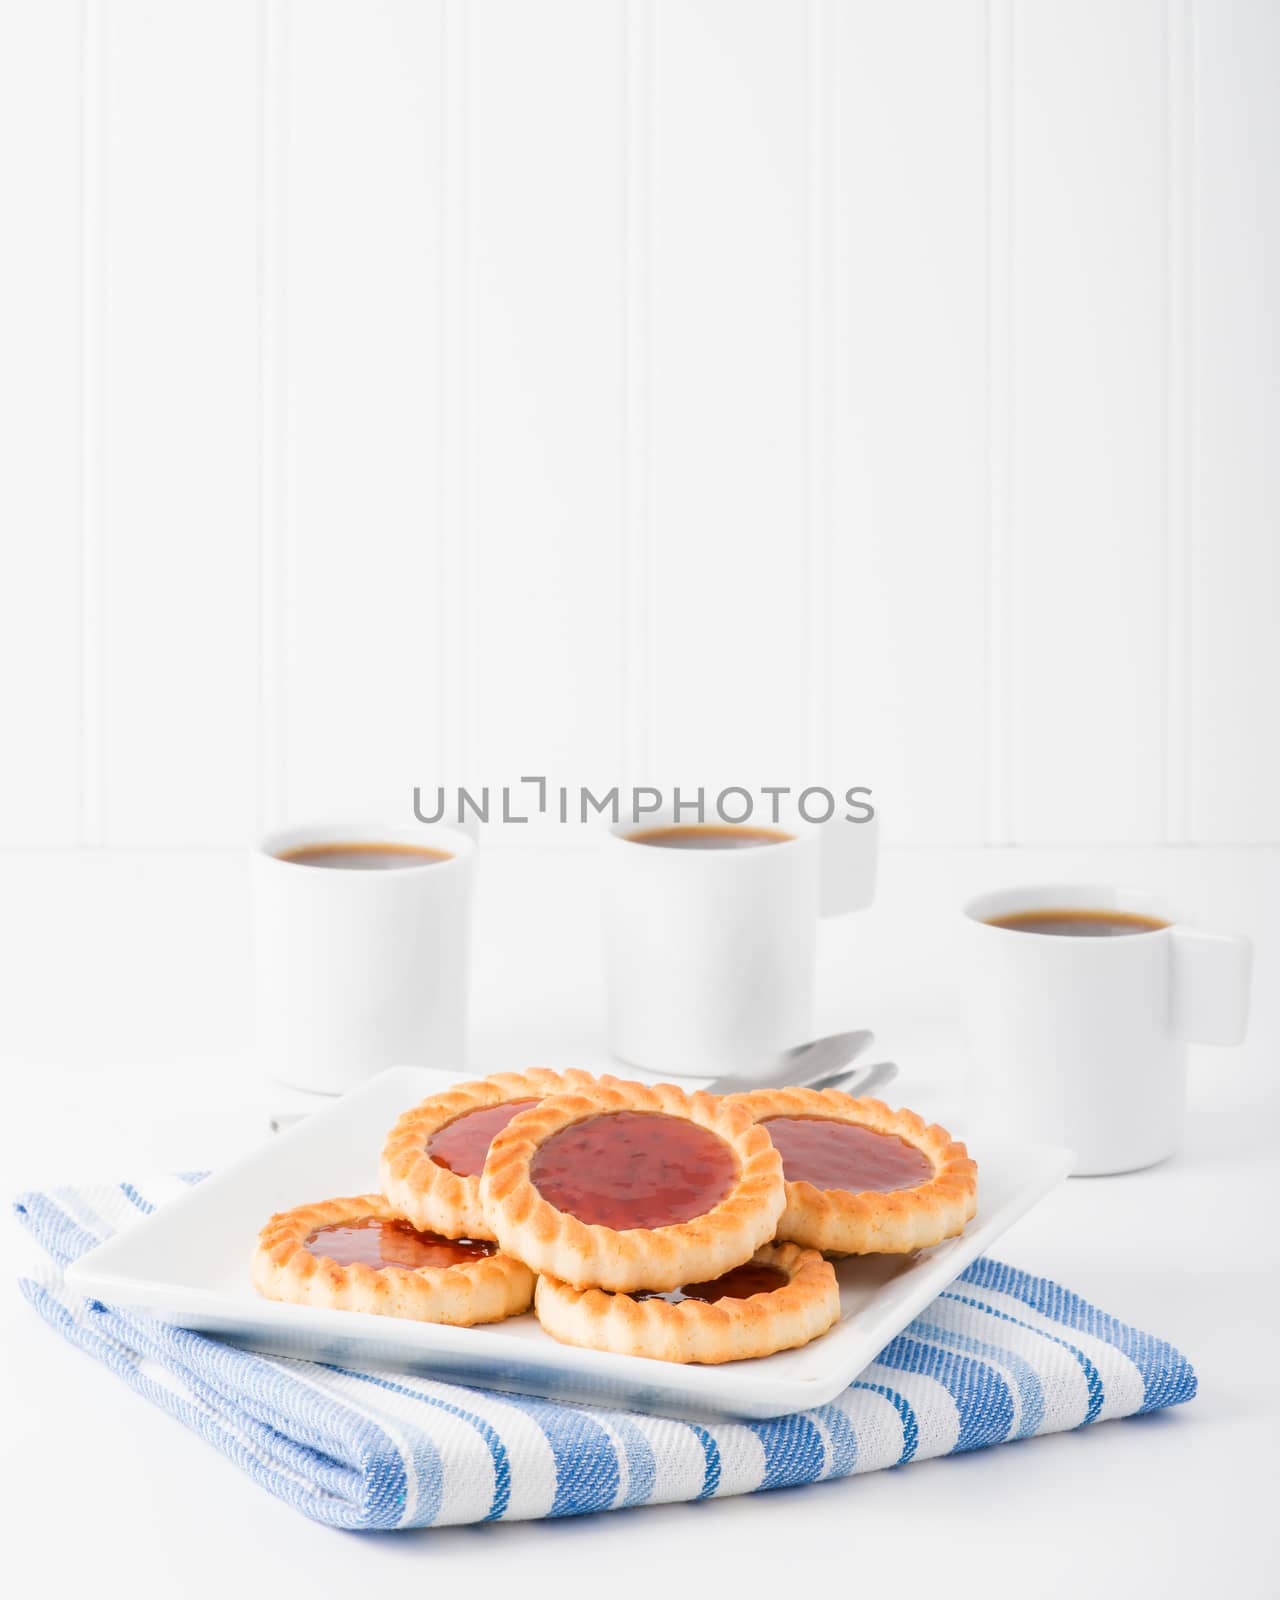 Plate of Jam Filled Cookies by billberryphotography